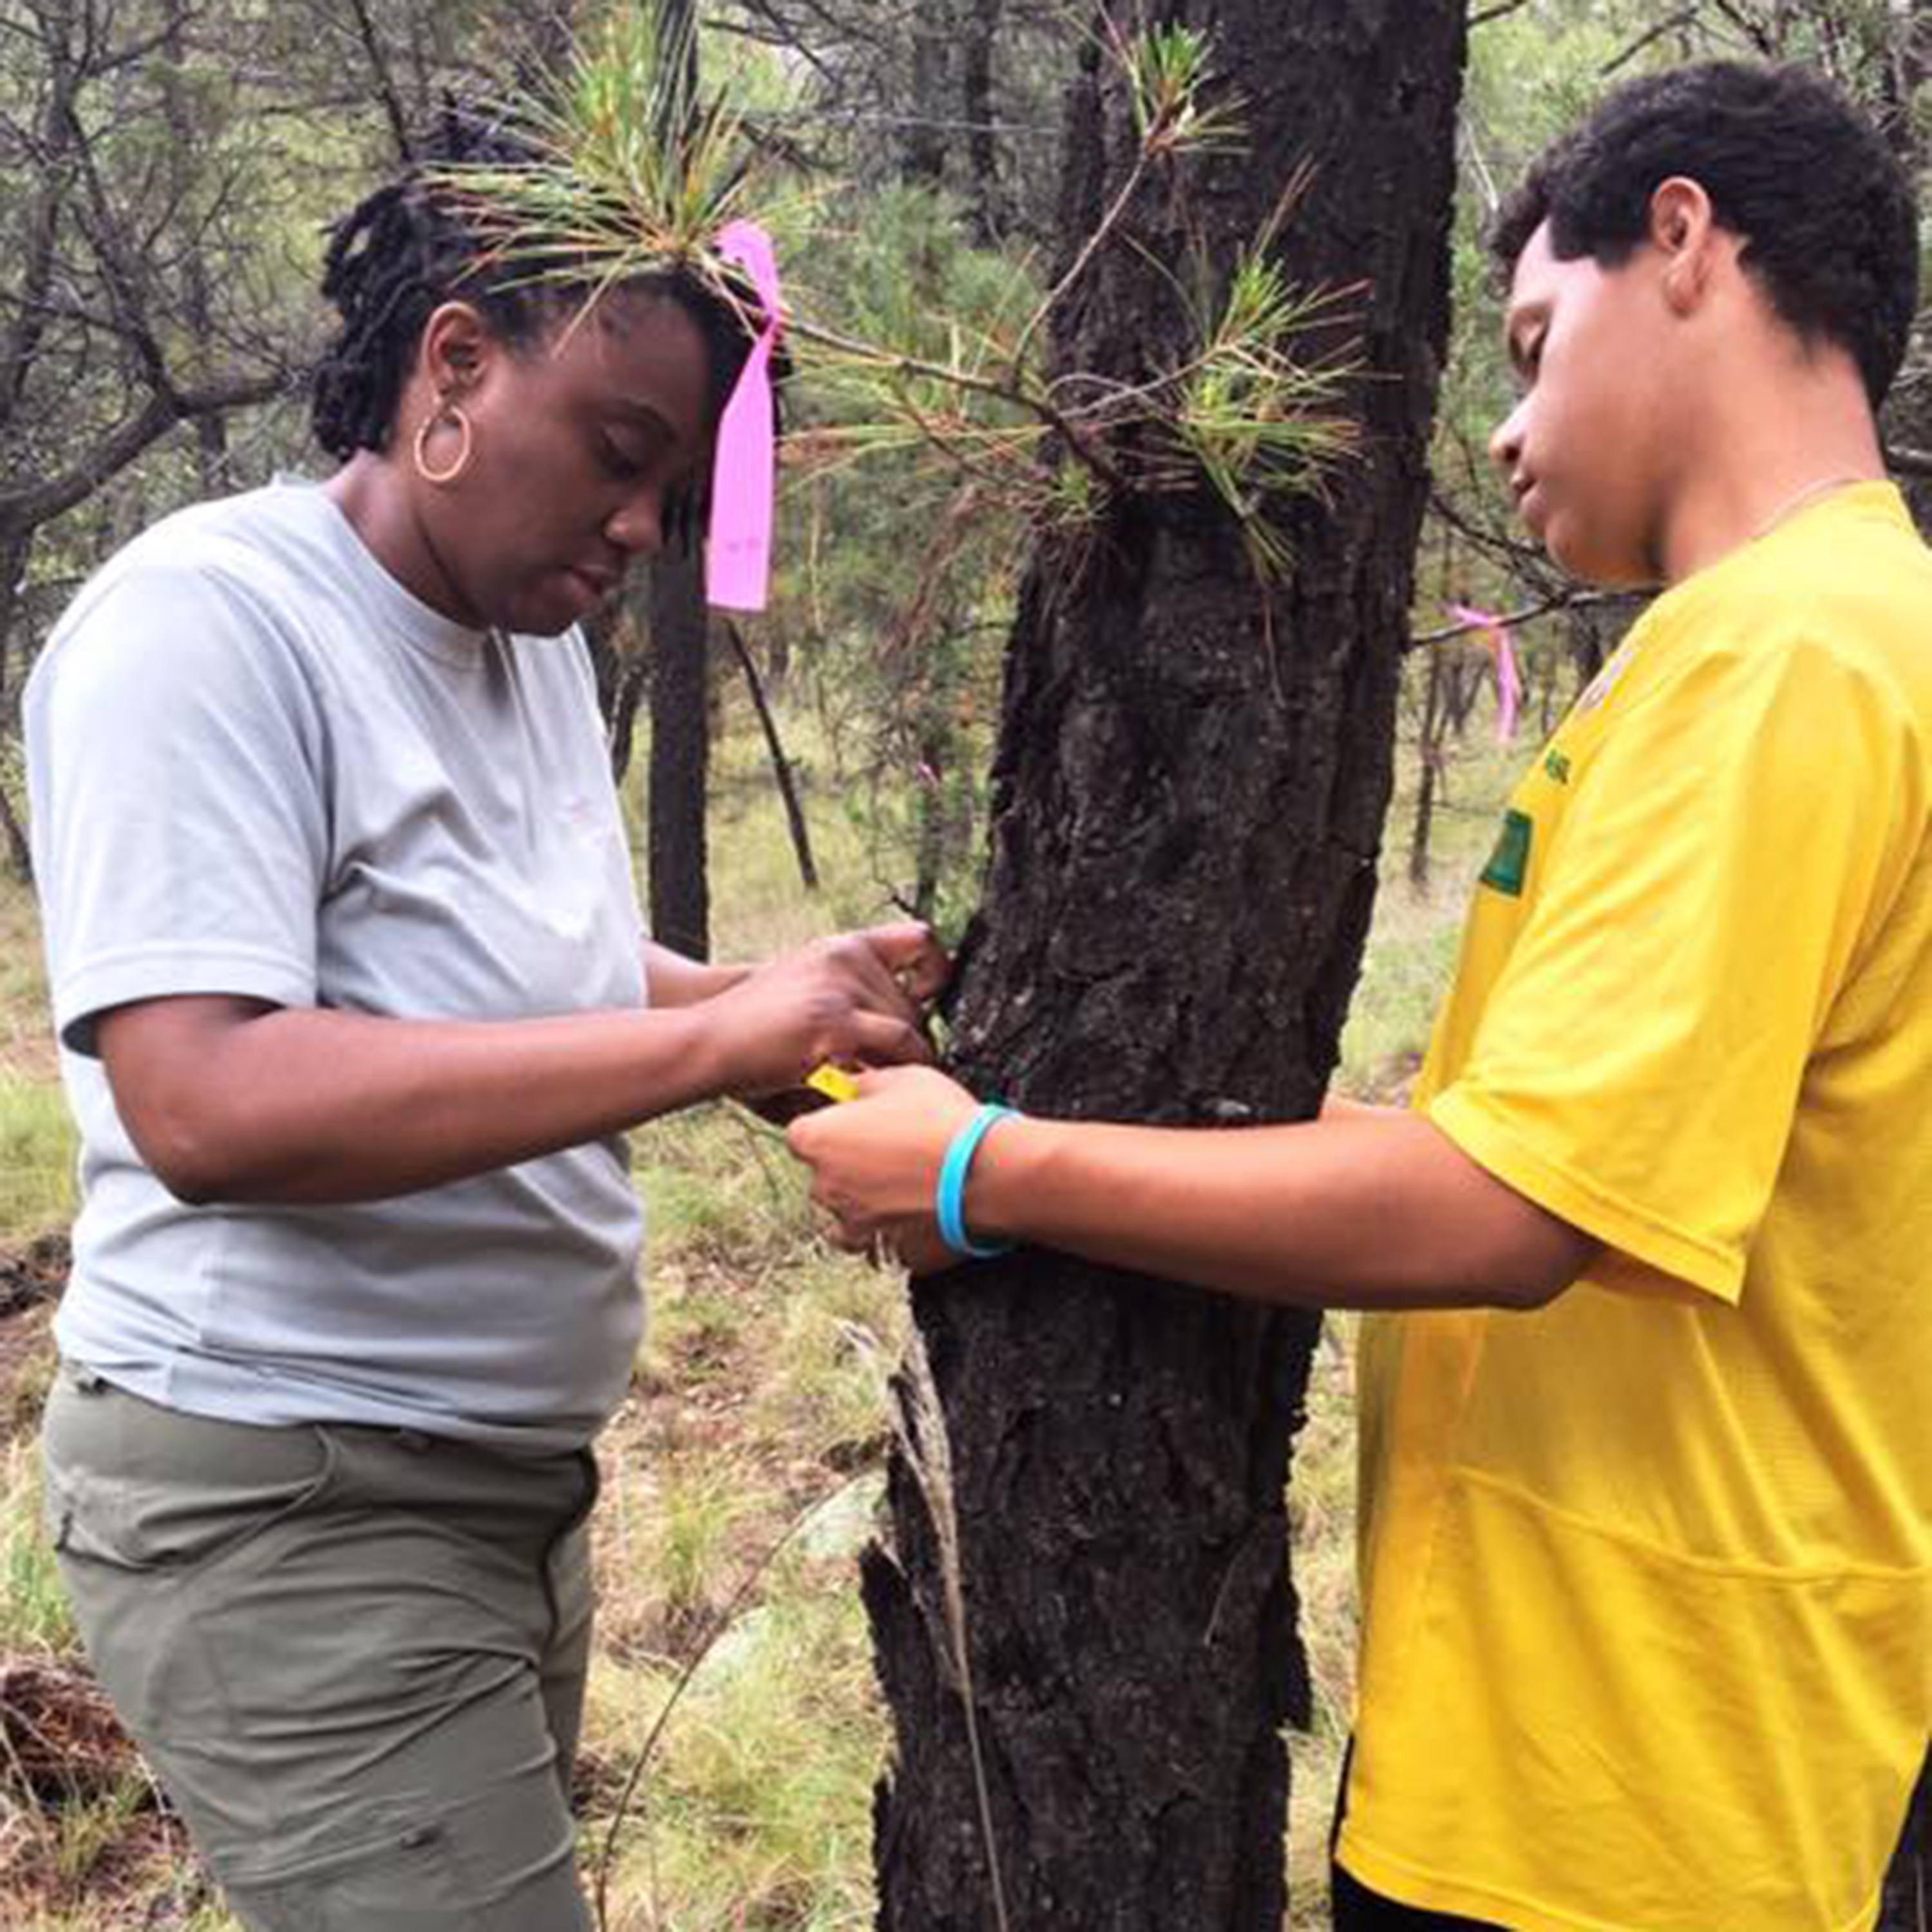 Since 1975, Earthwatch has sent almost 6,000 educators into the field through our Teach Earth fellowship, where they conduct actual field research alongside university scientists and brainstorm hands-on lesson plans with their team of fellow teachers. 